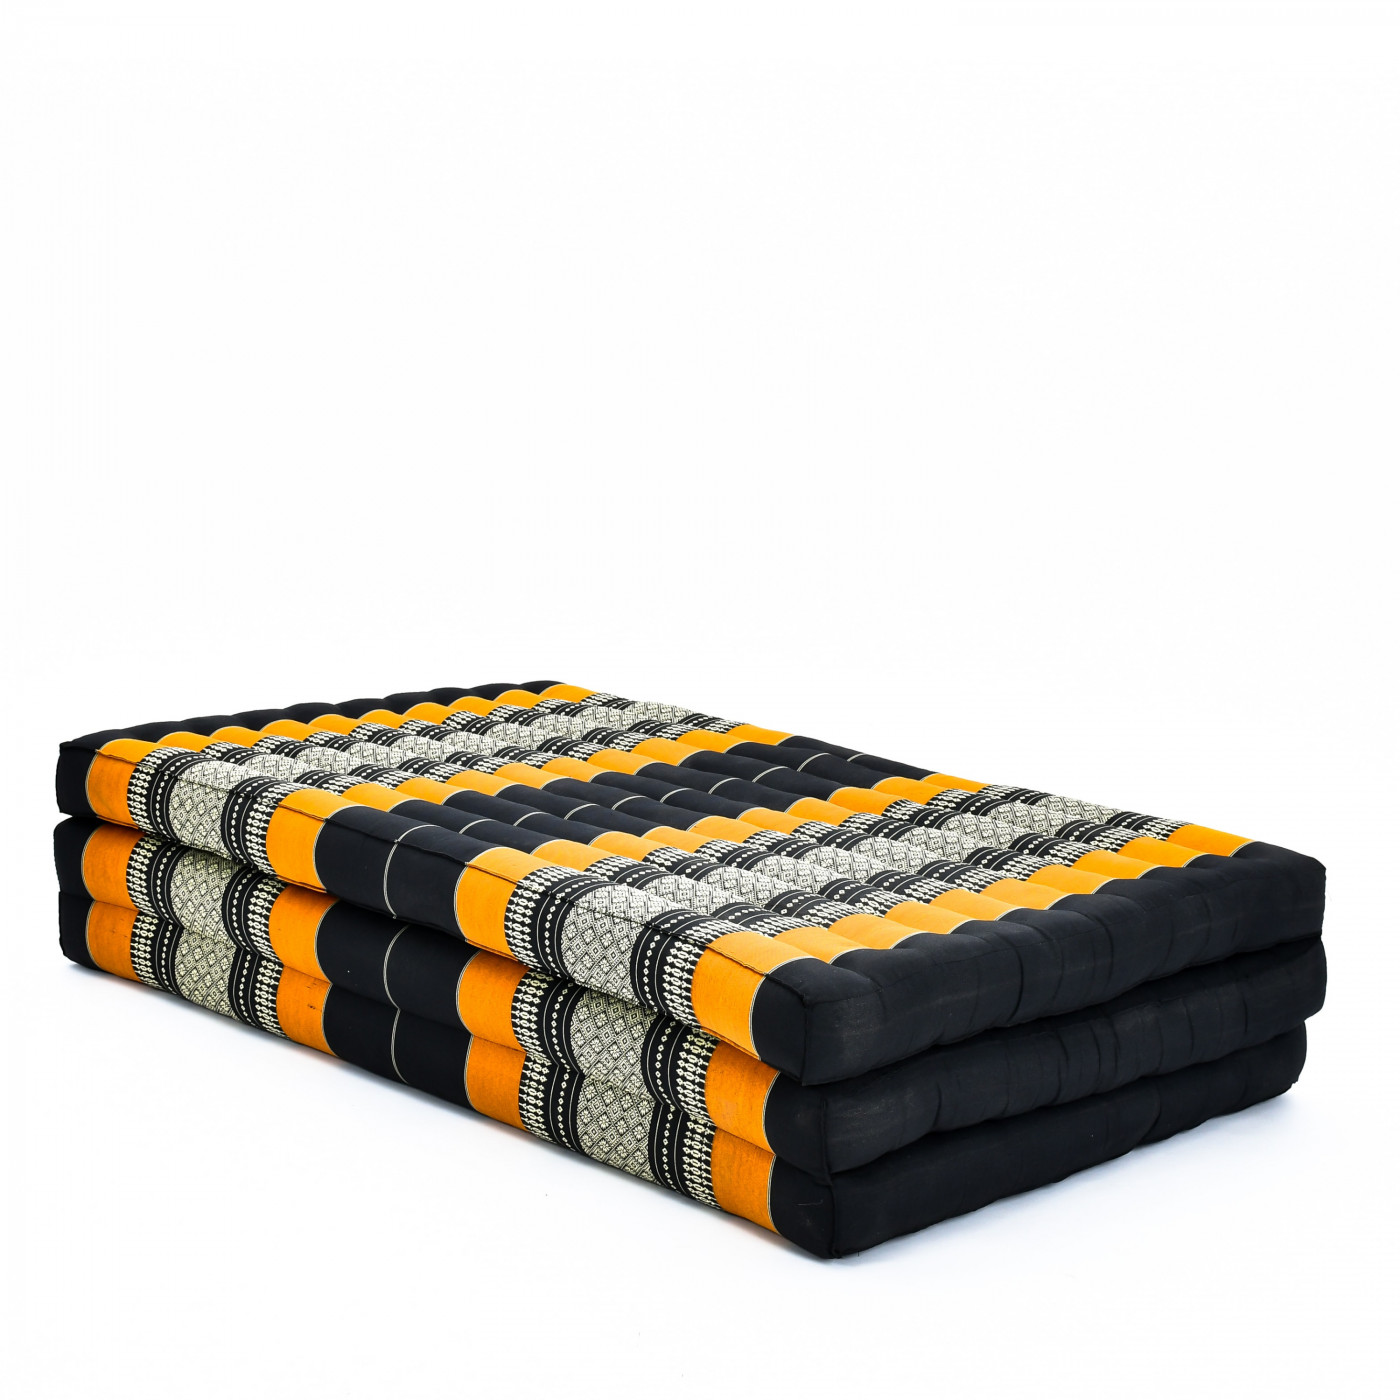 Perfect to Use as a Sleeping Mat 79 x 28 inches Black LEEWADEE Trifold Mattress Standard – Comfortable Thai Massage Pad Foldable Floor Mattress Filled with Eco-Friendly Kapok 